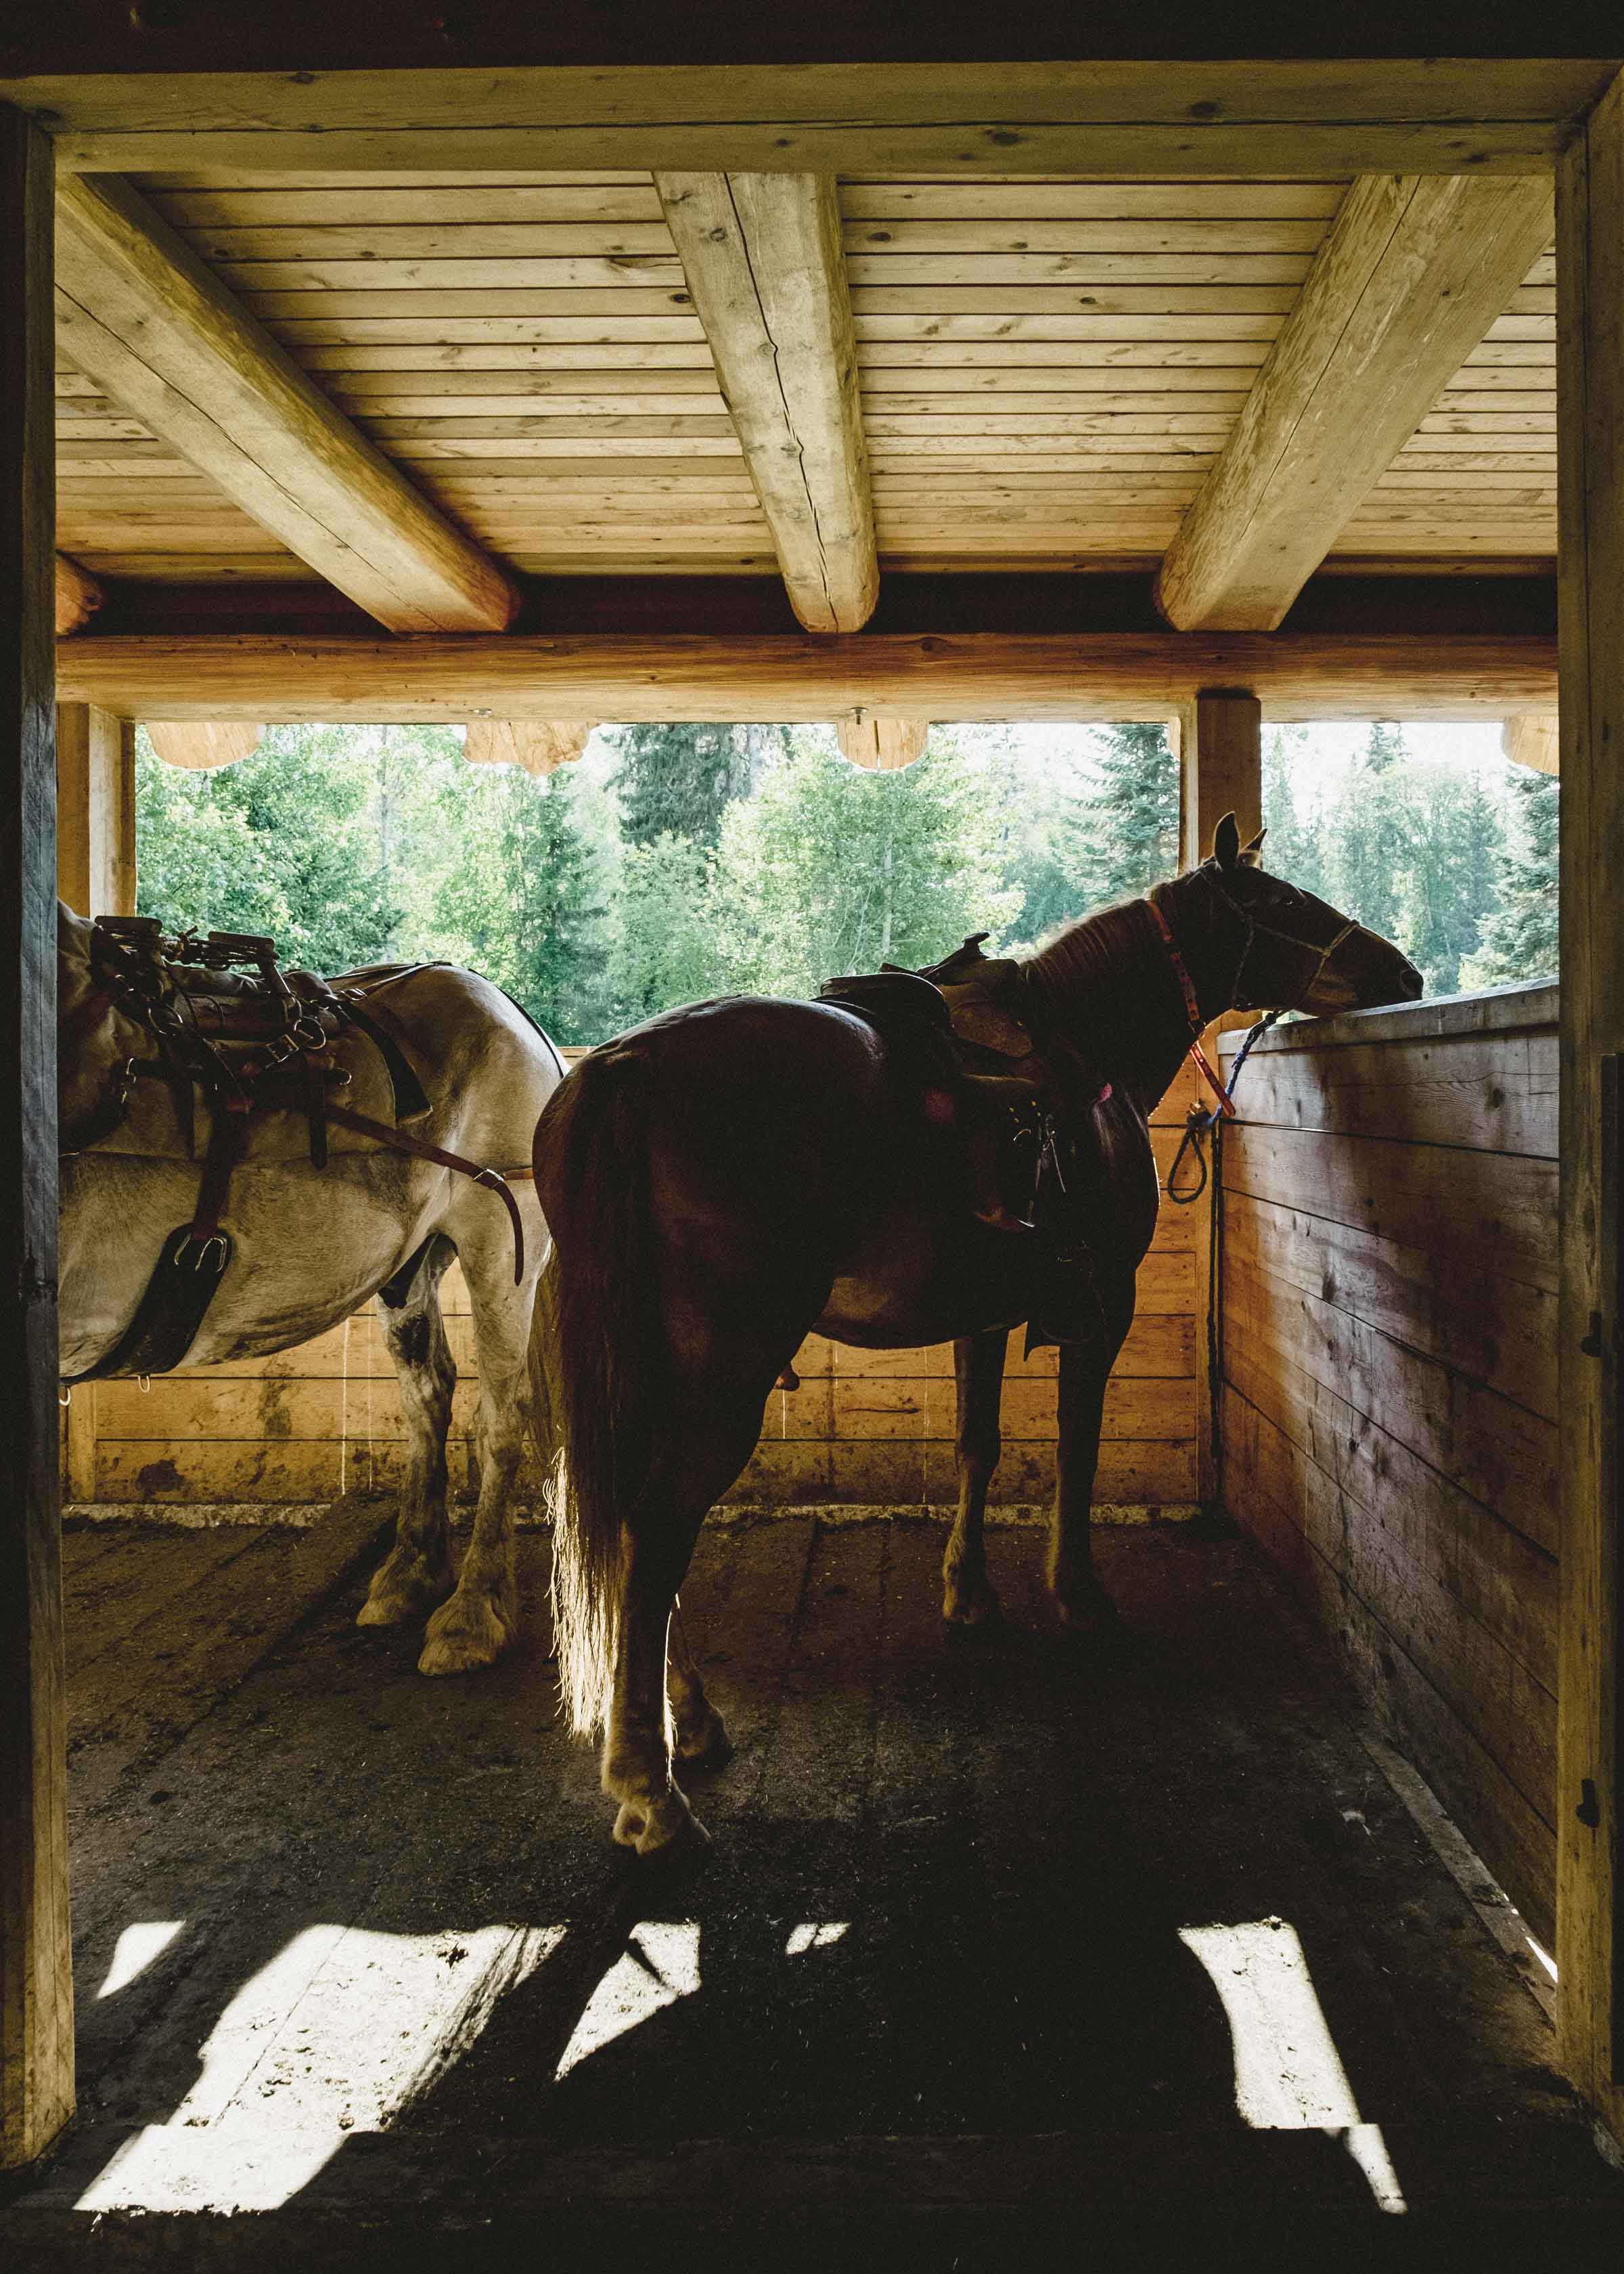 The horses are happy to be back at the stable of Bear Claw Lodge